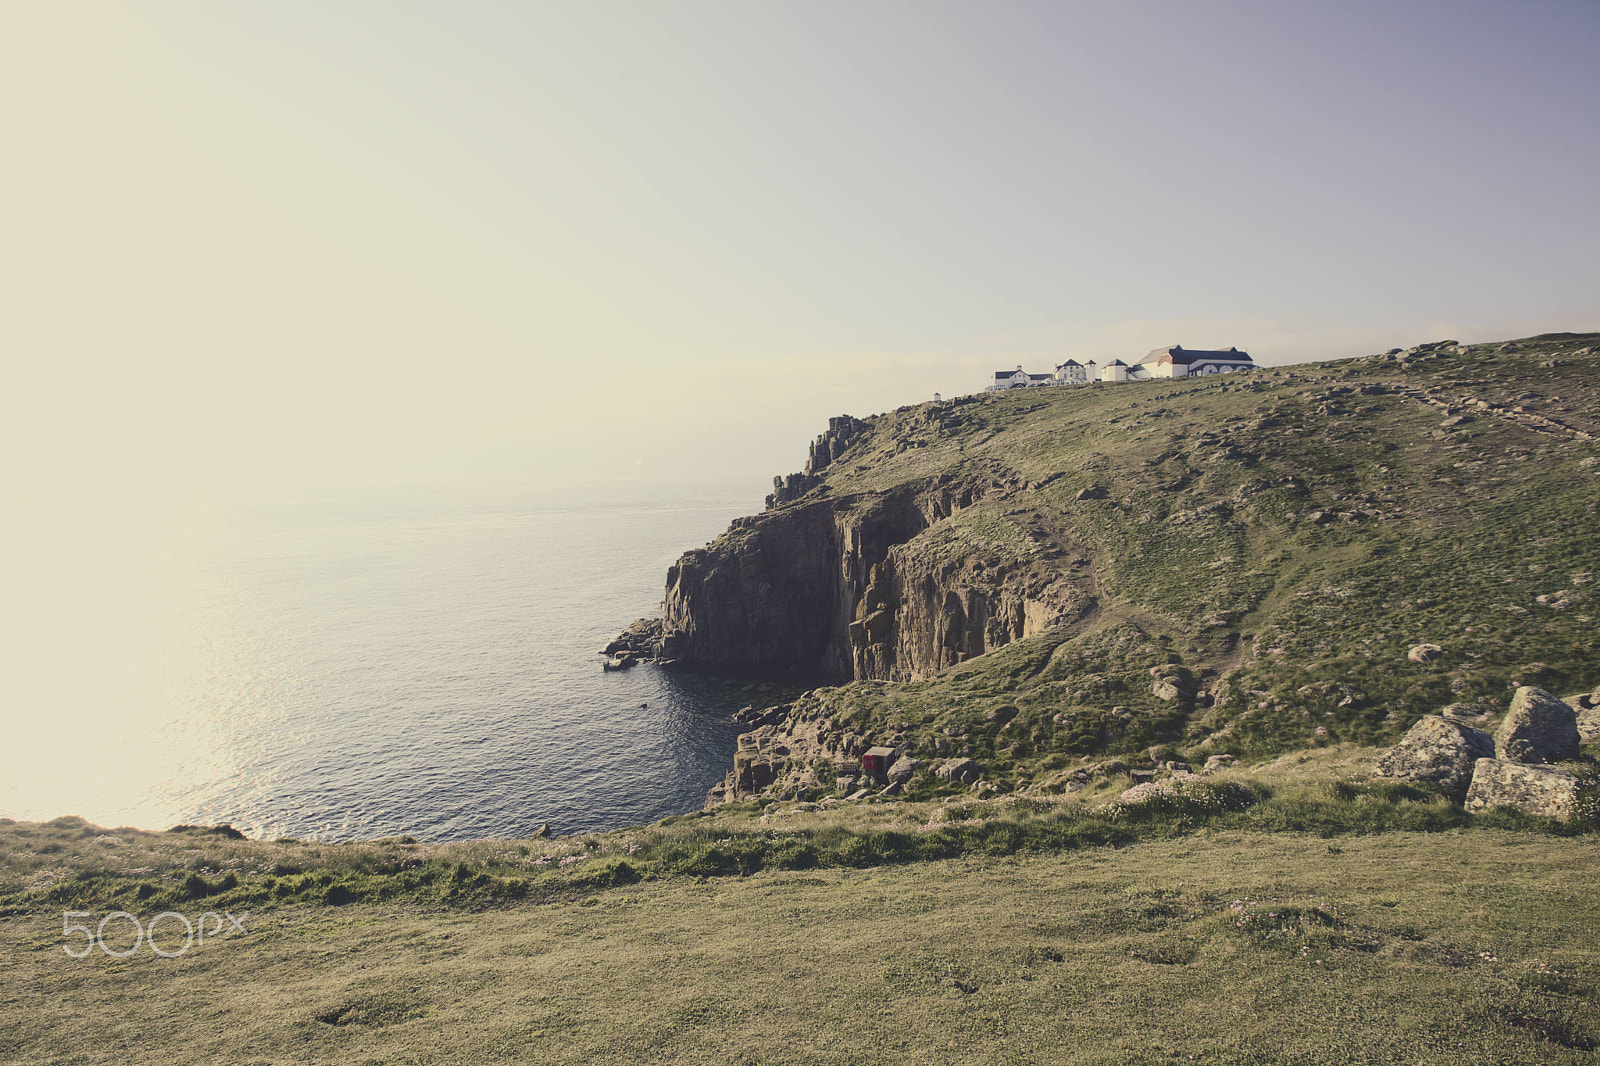 16.0 - 35.0 mm sample photo. Land's end, cornwall, uk photography